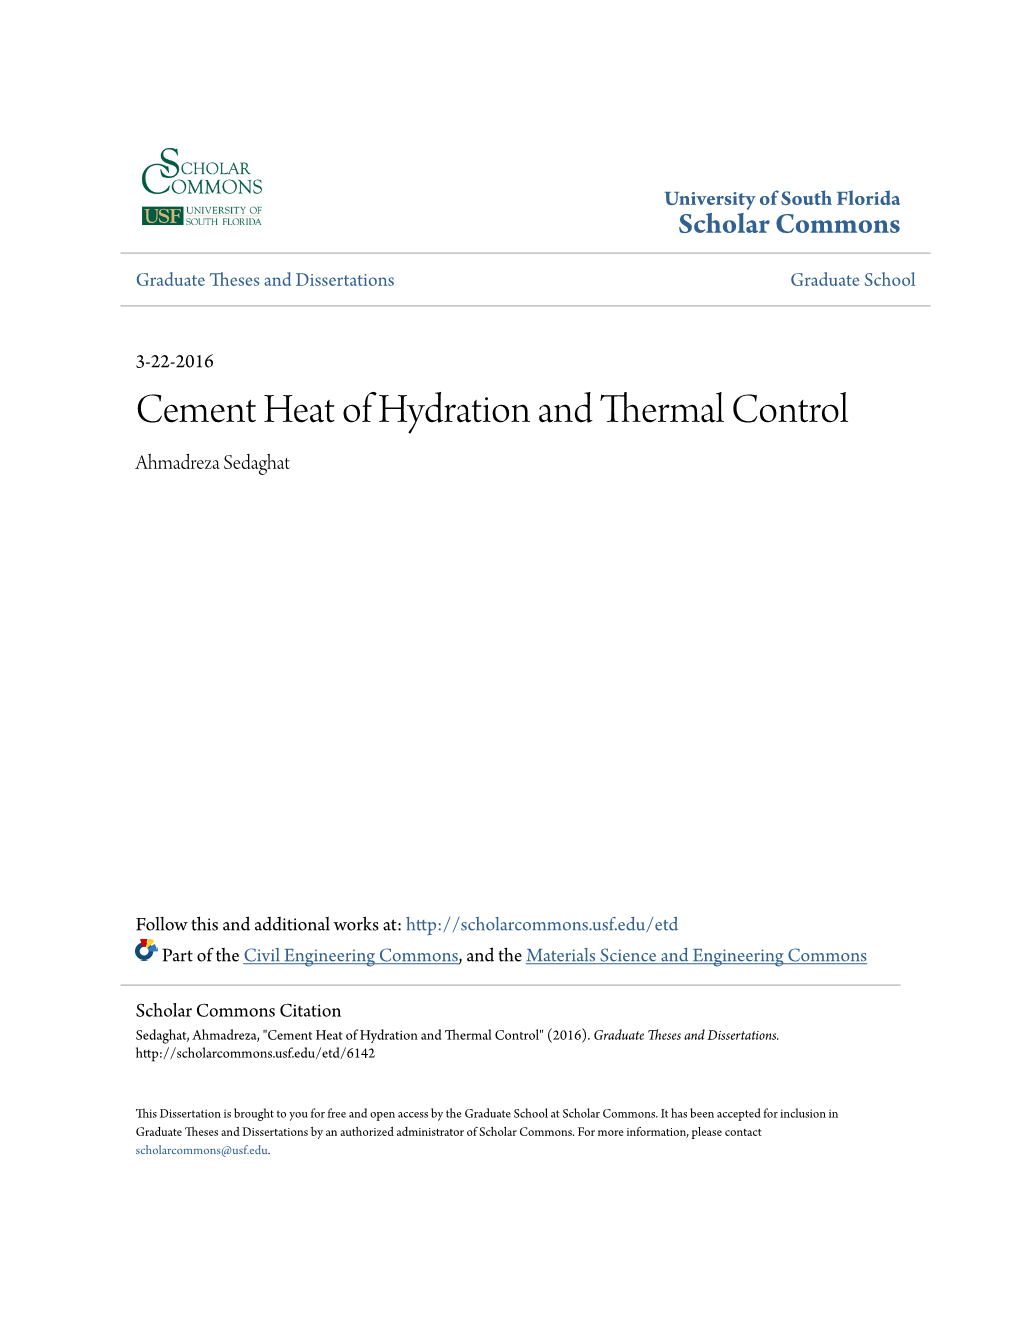 Cement Heat of Hydration and Thermal Control Ahmadreza Sedaghat